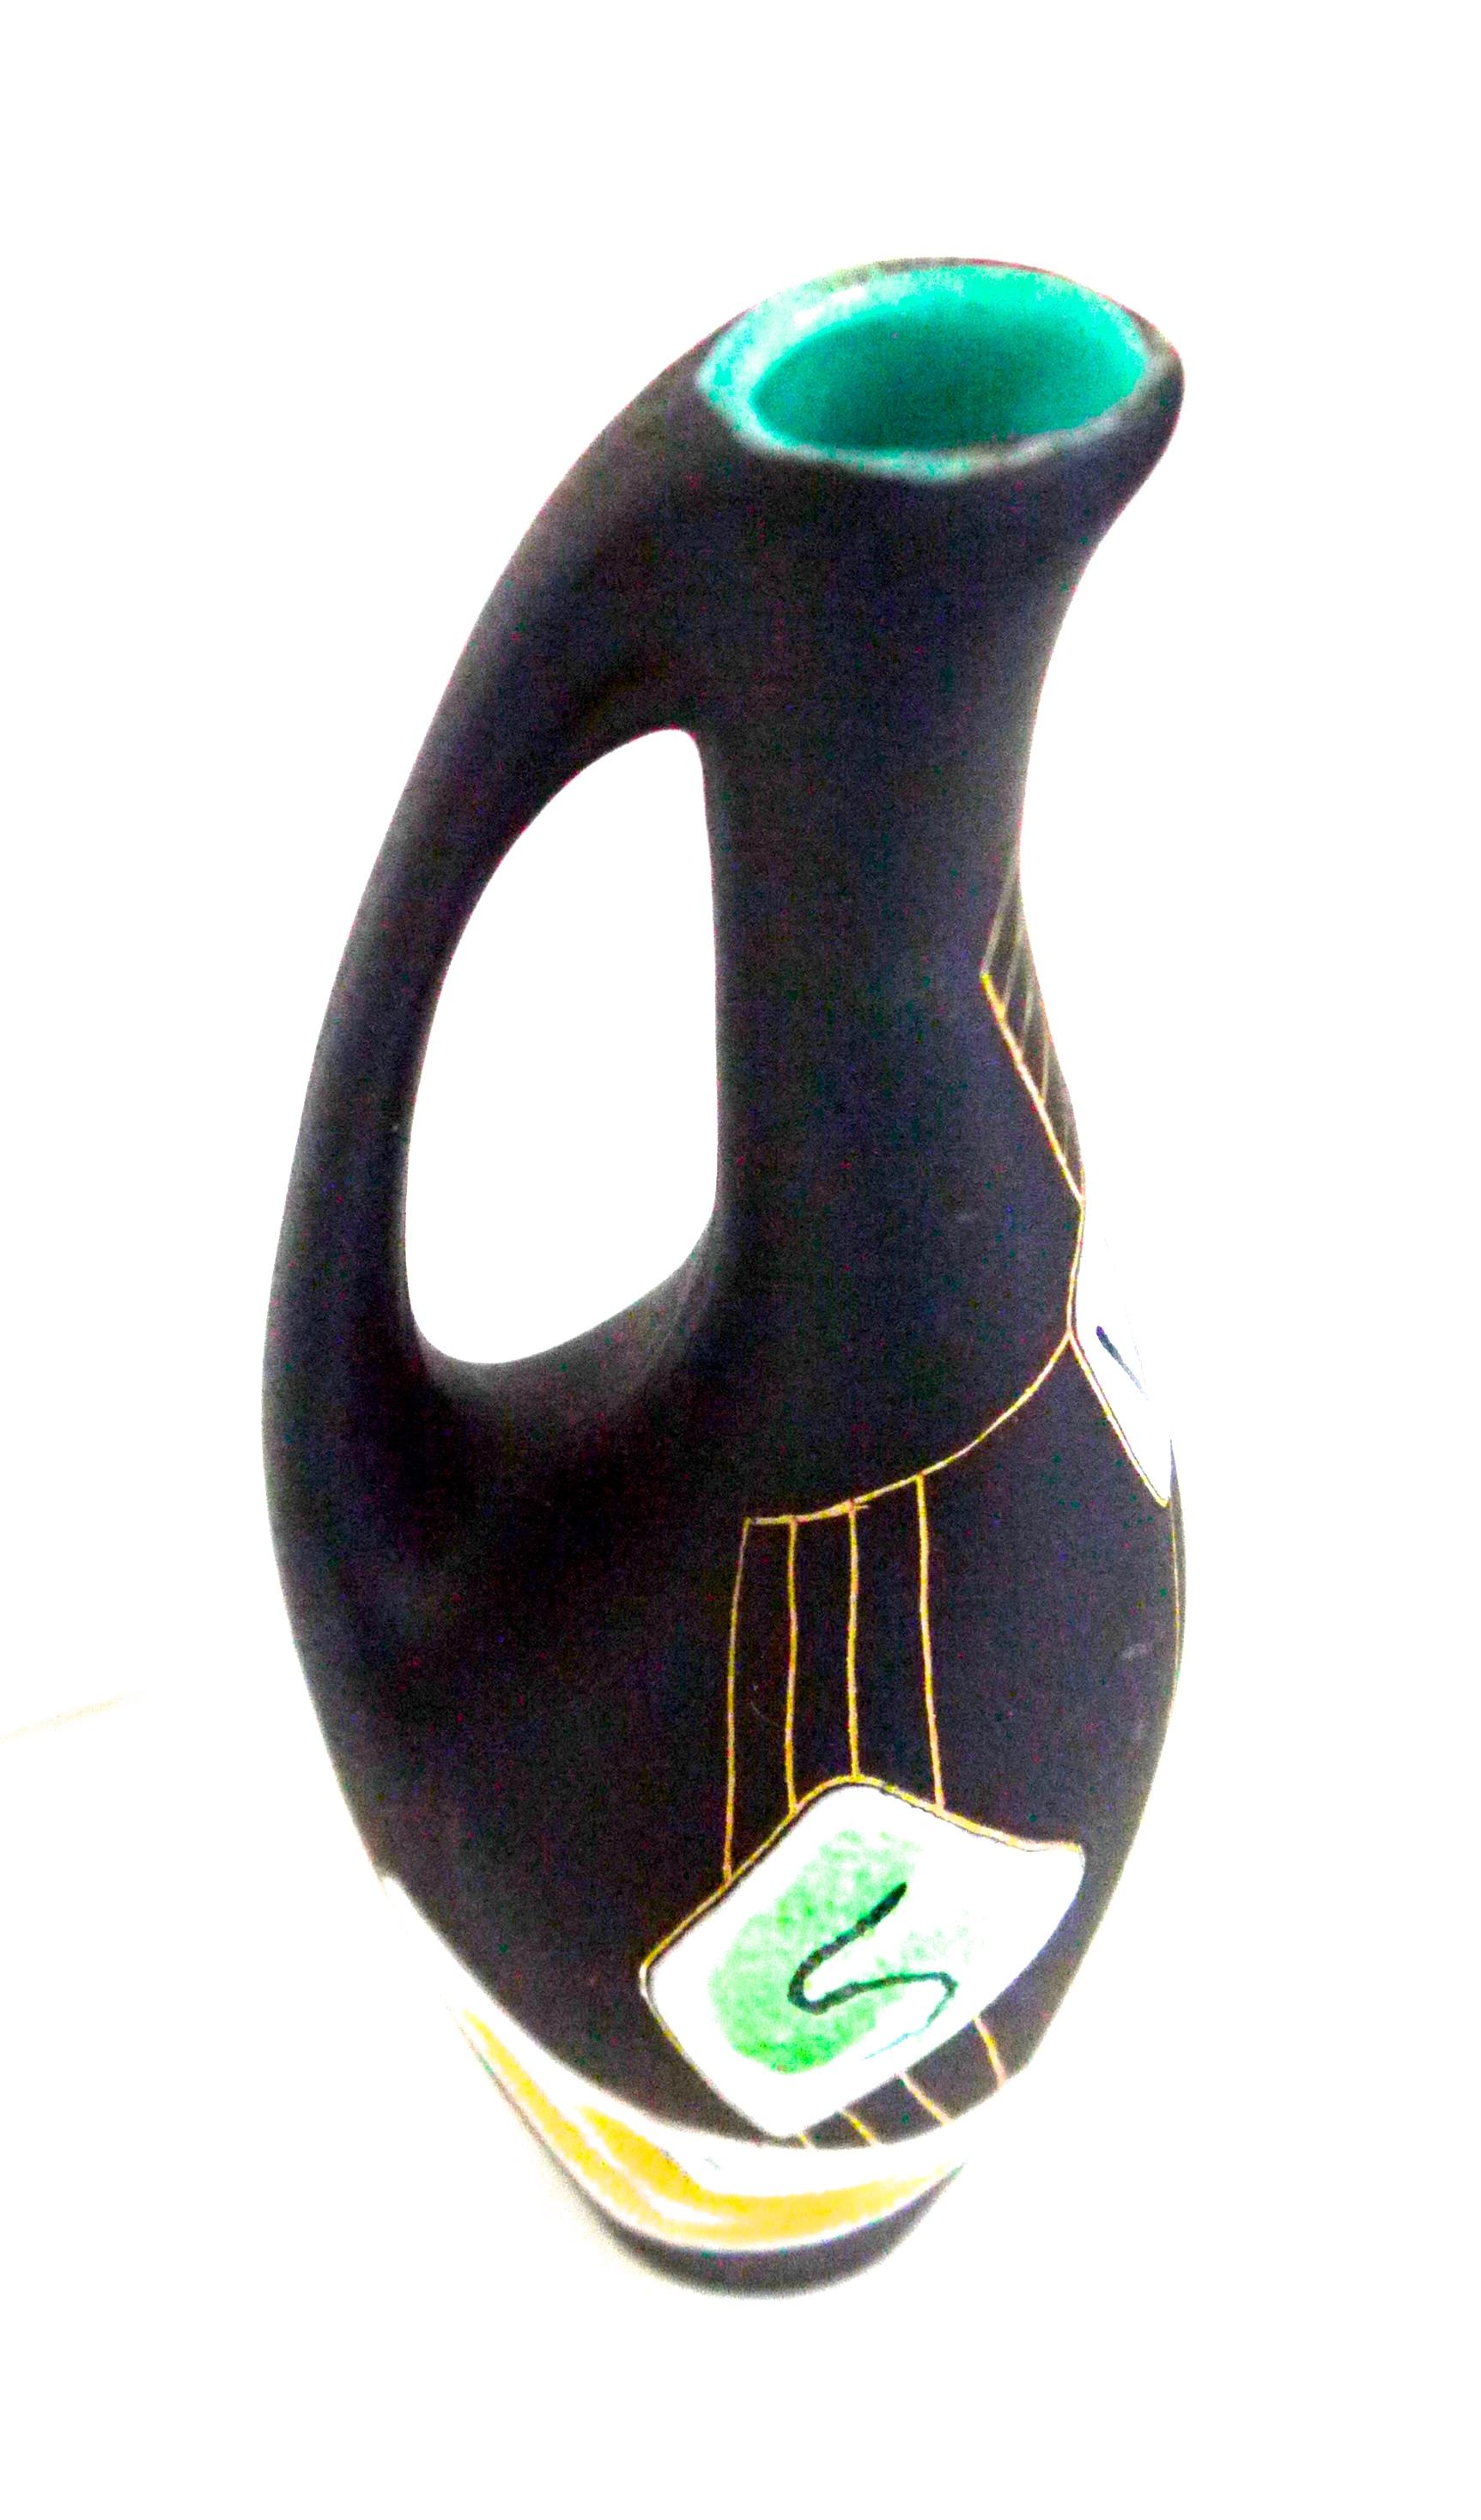 German Modernist Hand Painted Ceramic Pitcher 'small' 'Morroco' Design, 1950s In Good Condition For Sale In Halstead, GB